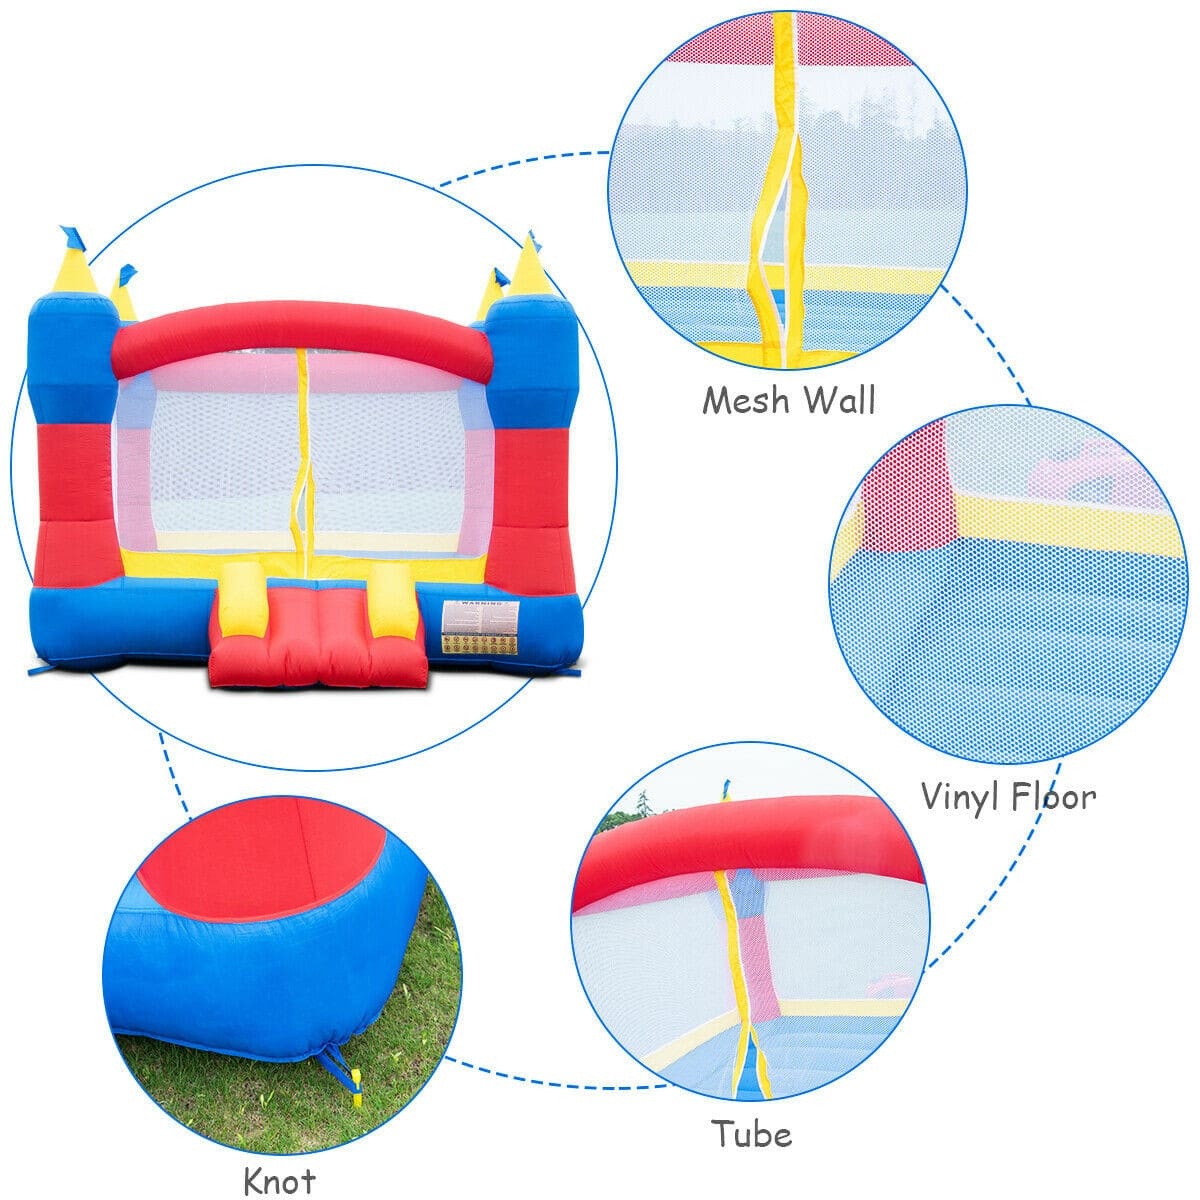 Magic Castle Inflatable Bounce House Without Blower